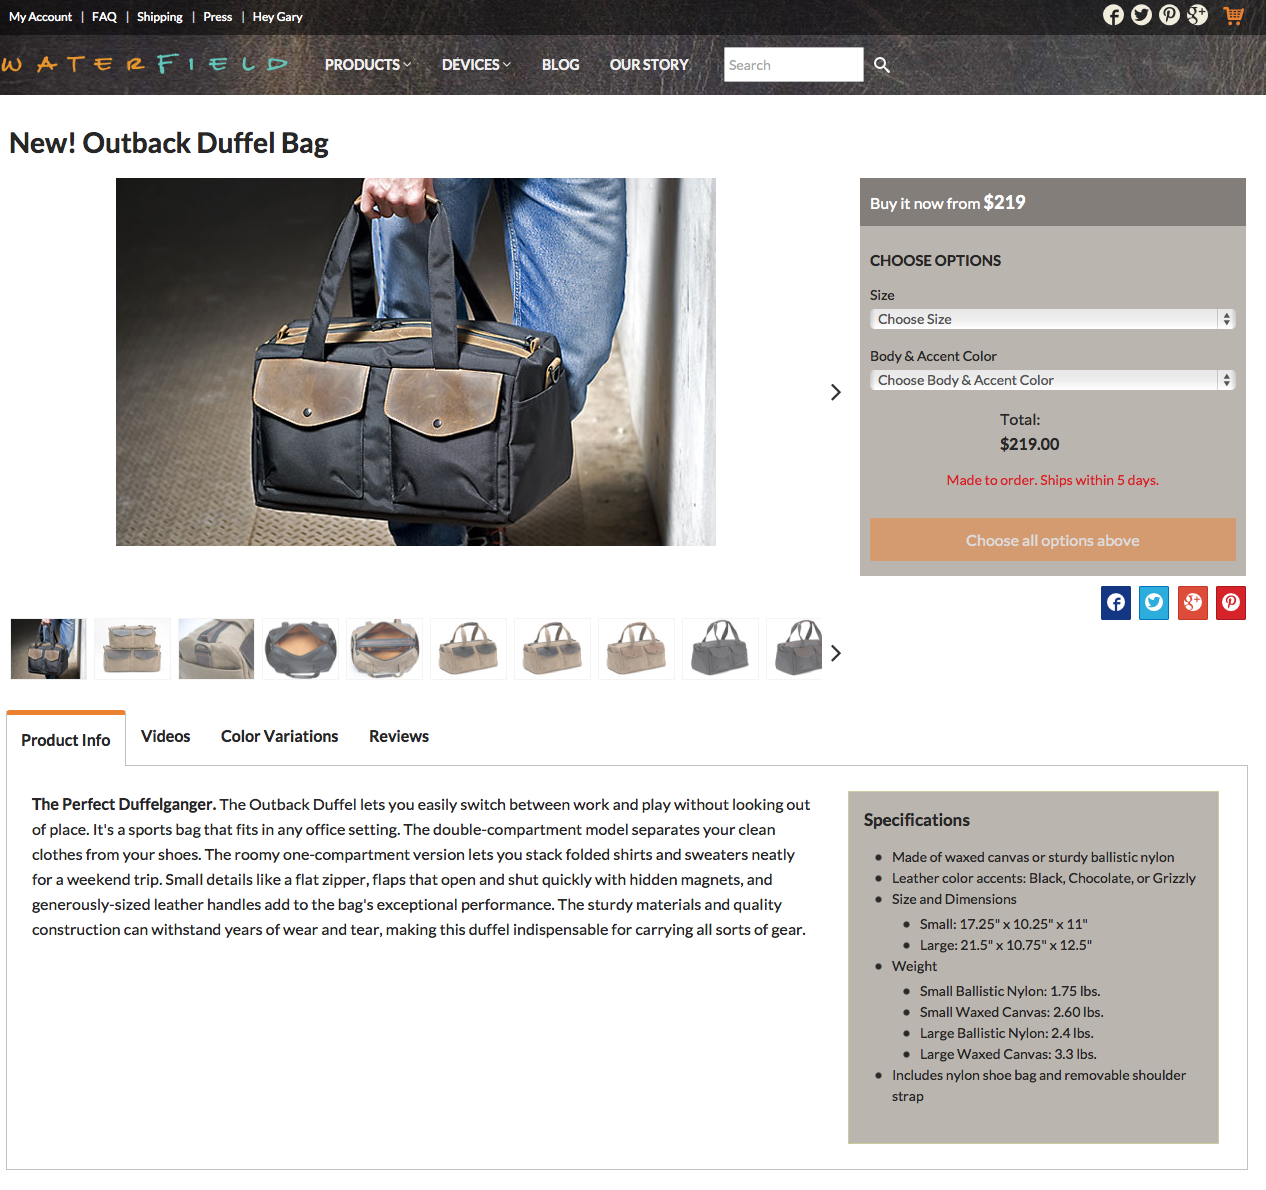 Outback Duffel Product Page